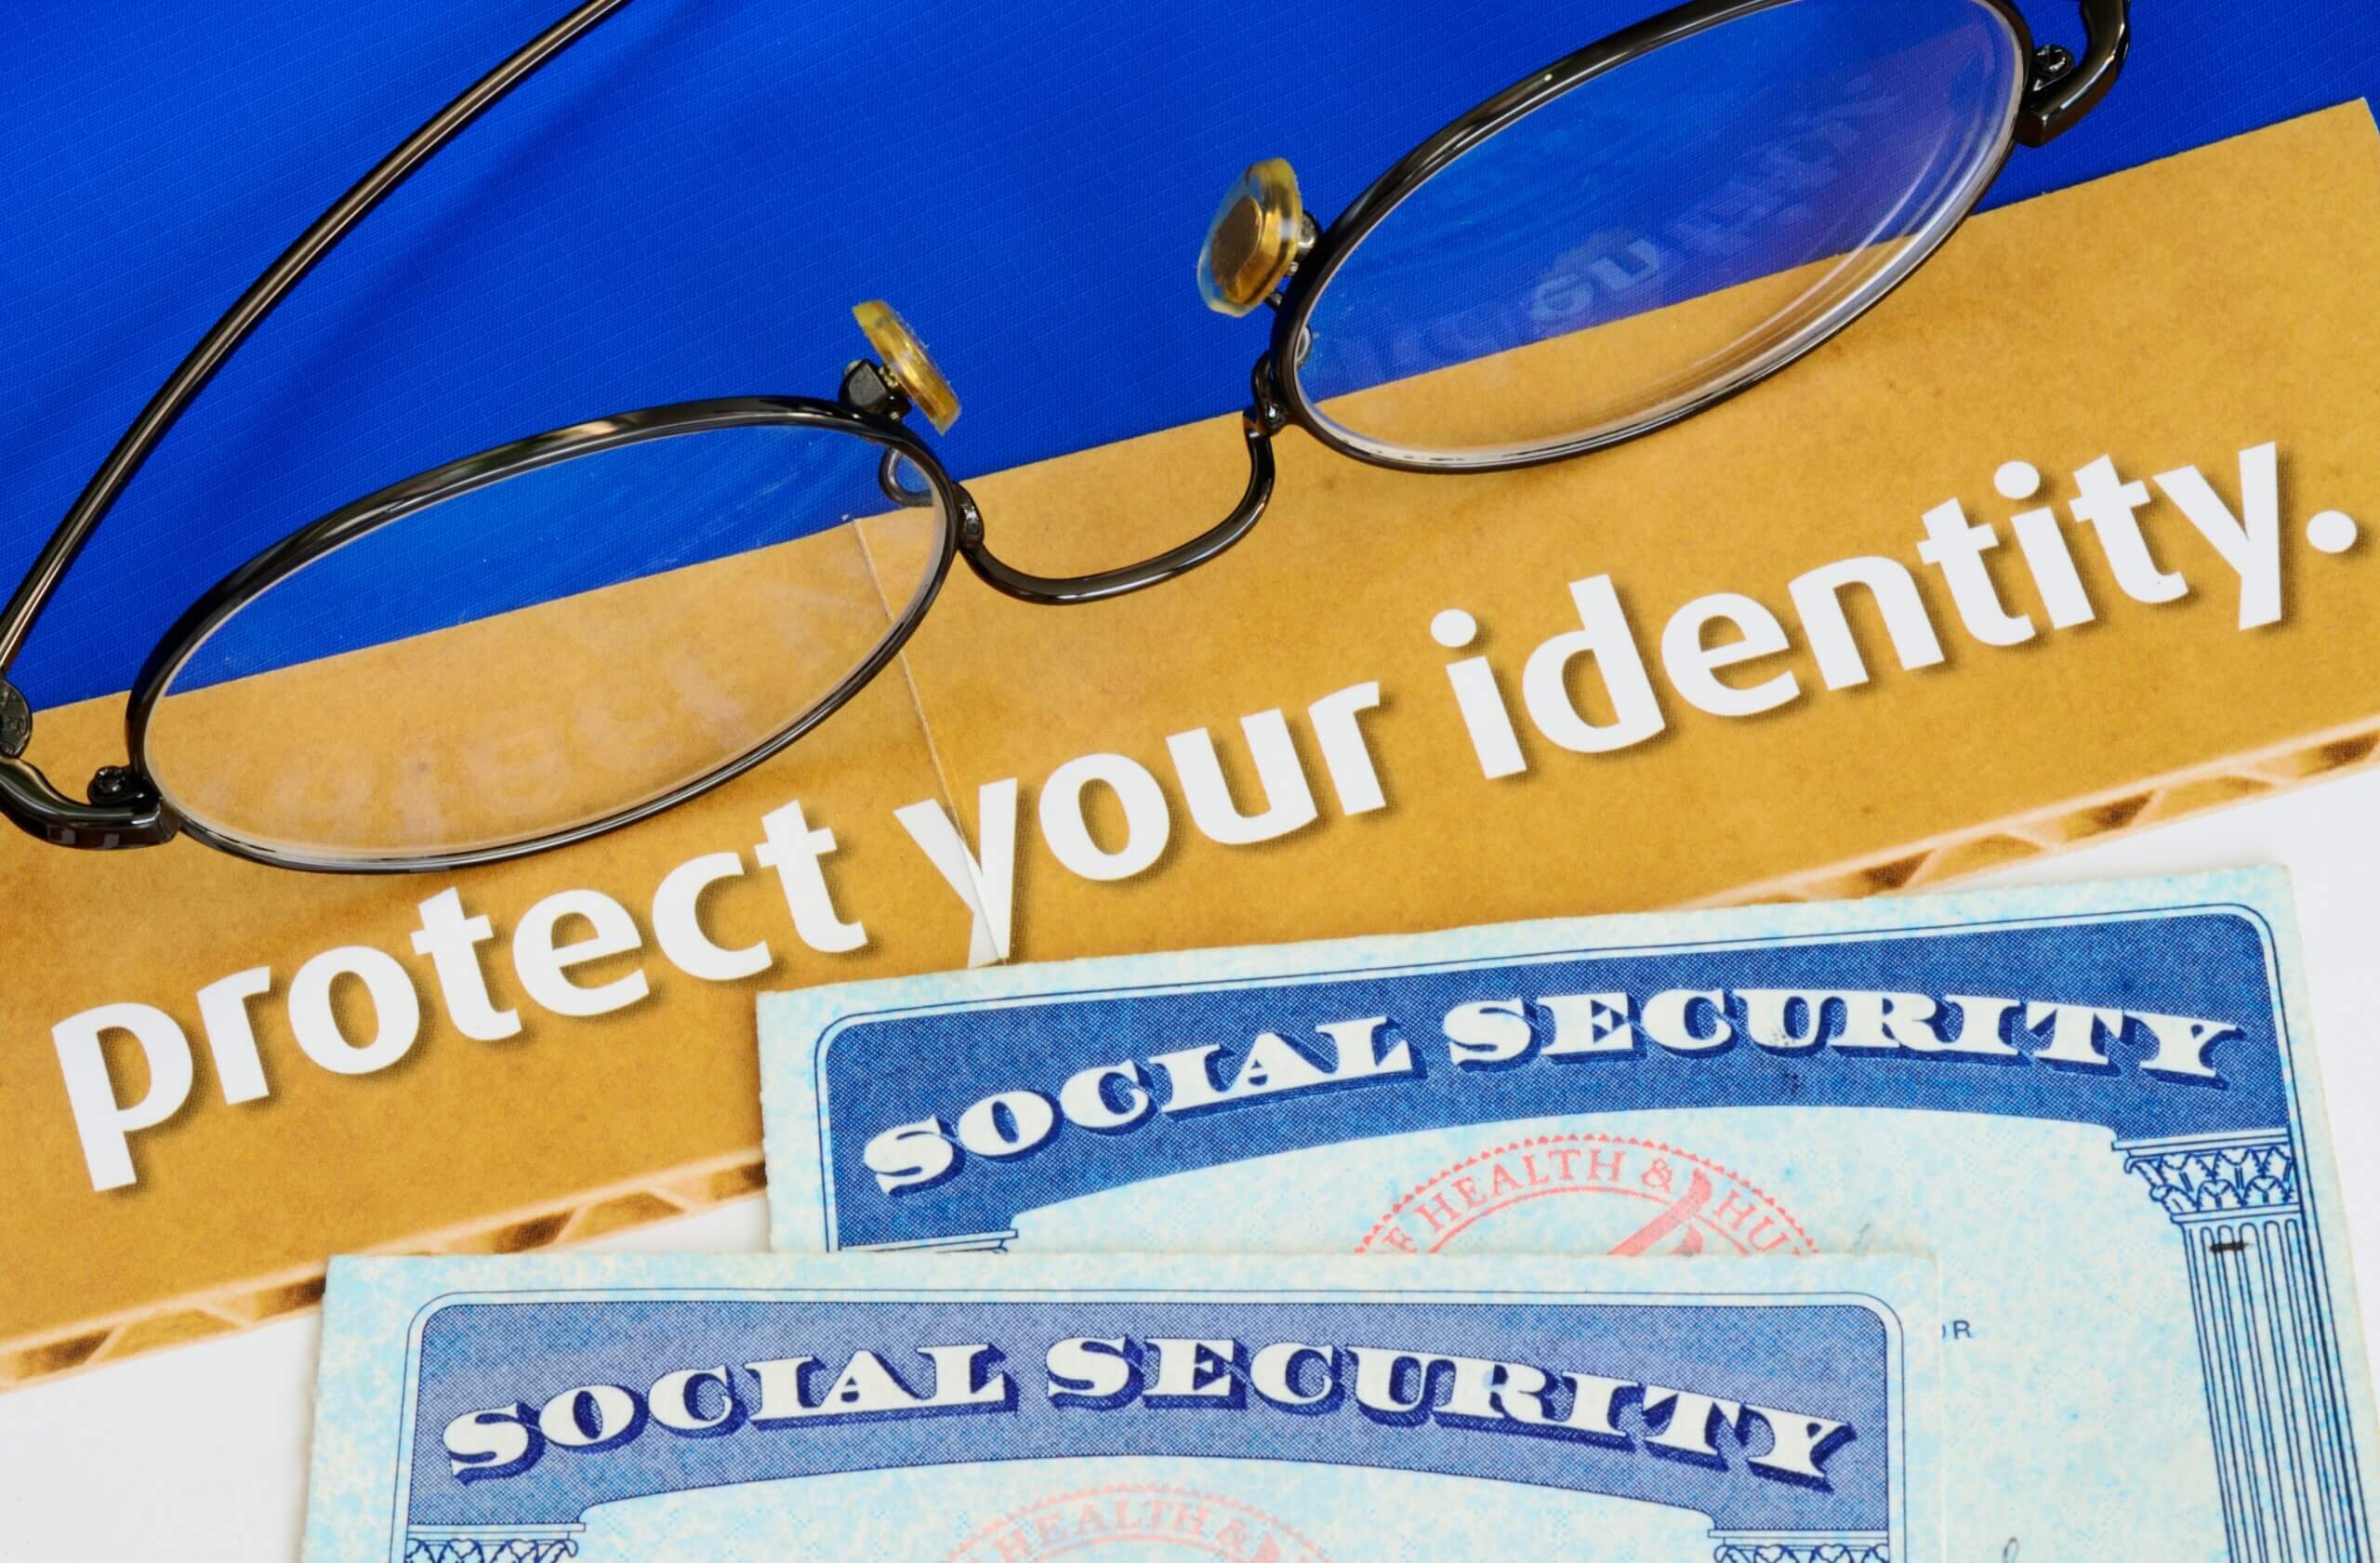 how to report identity theft in California